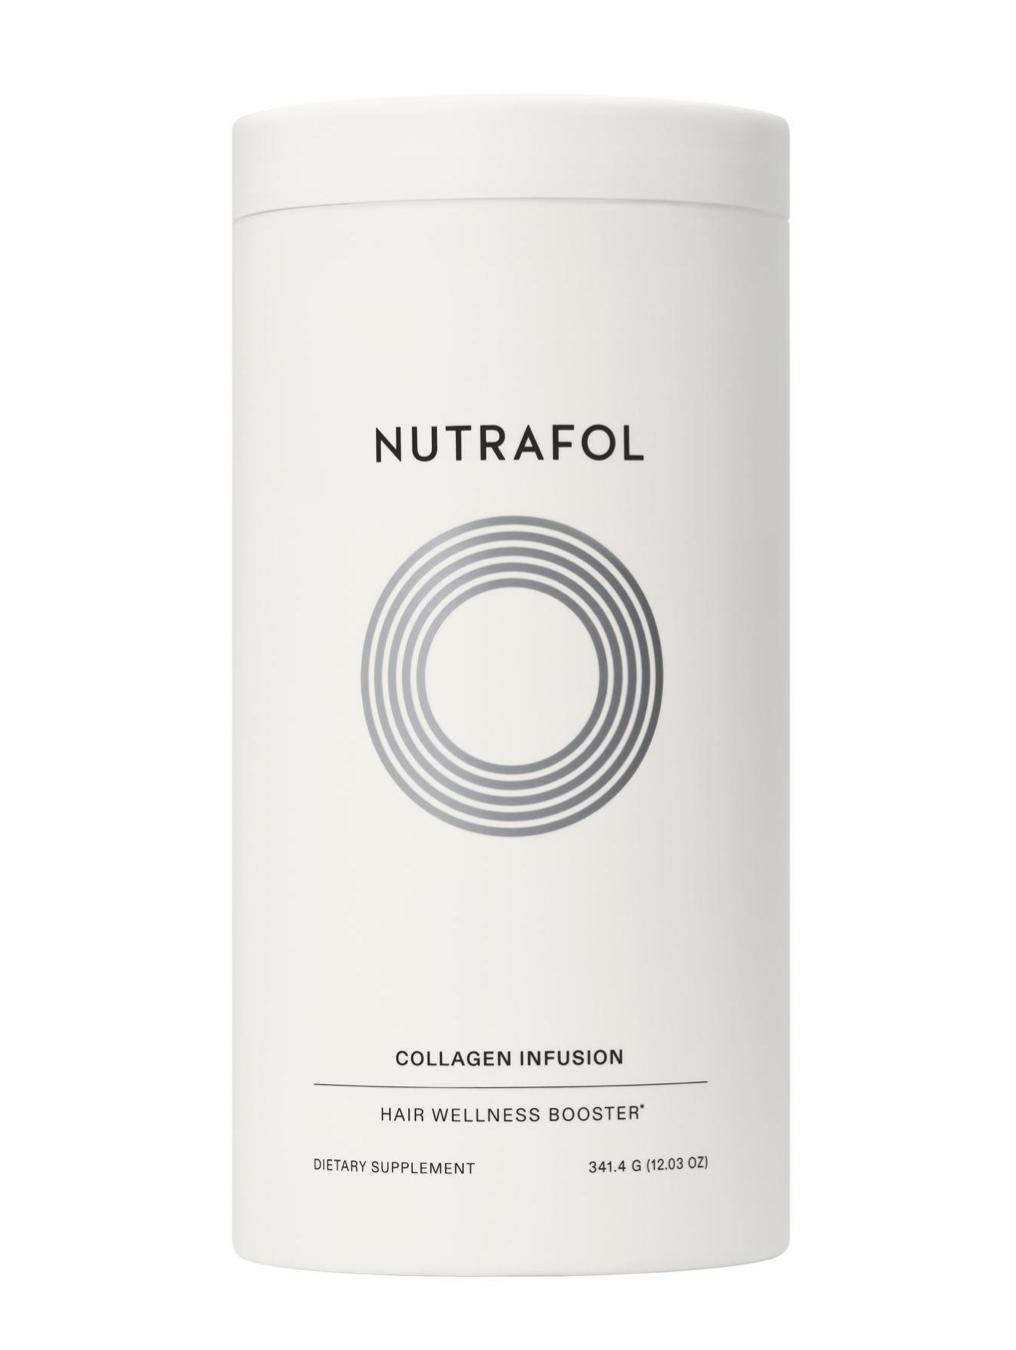 Nutrafol - Collagen Infusion